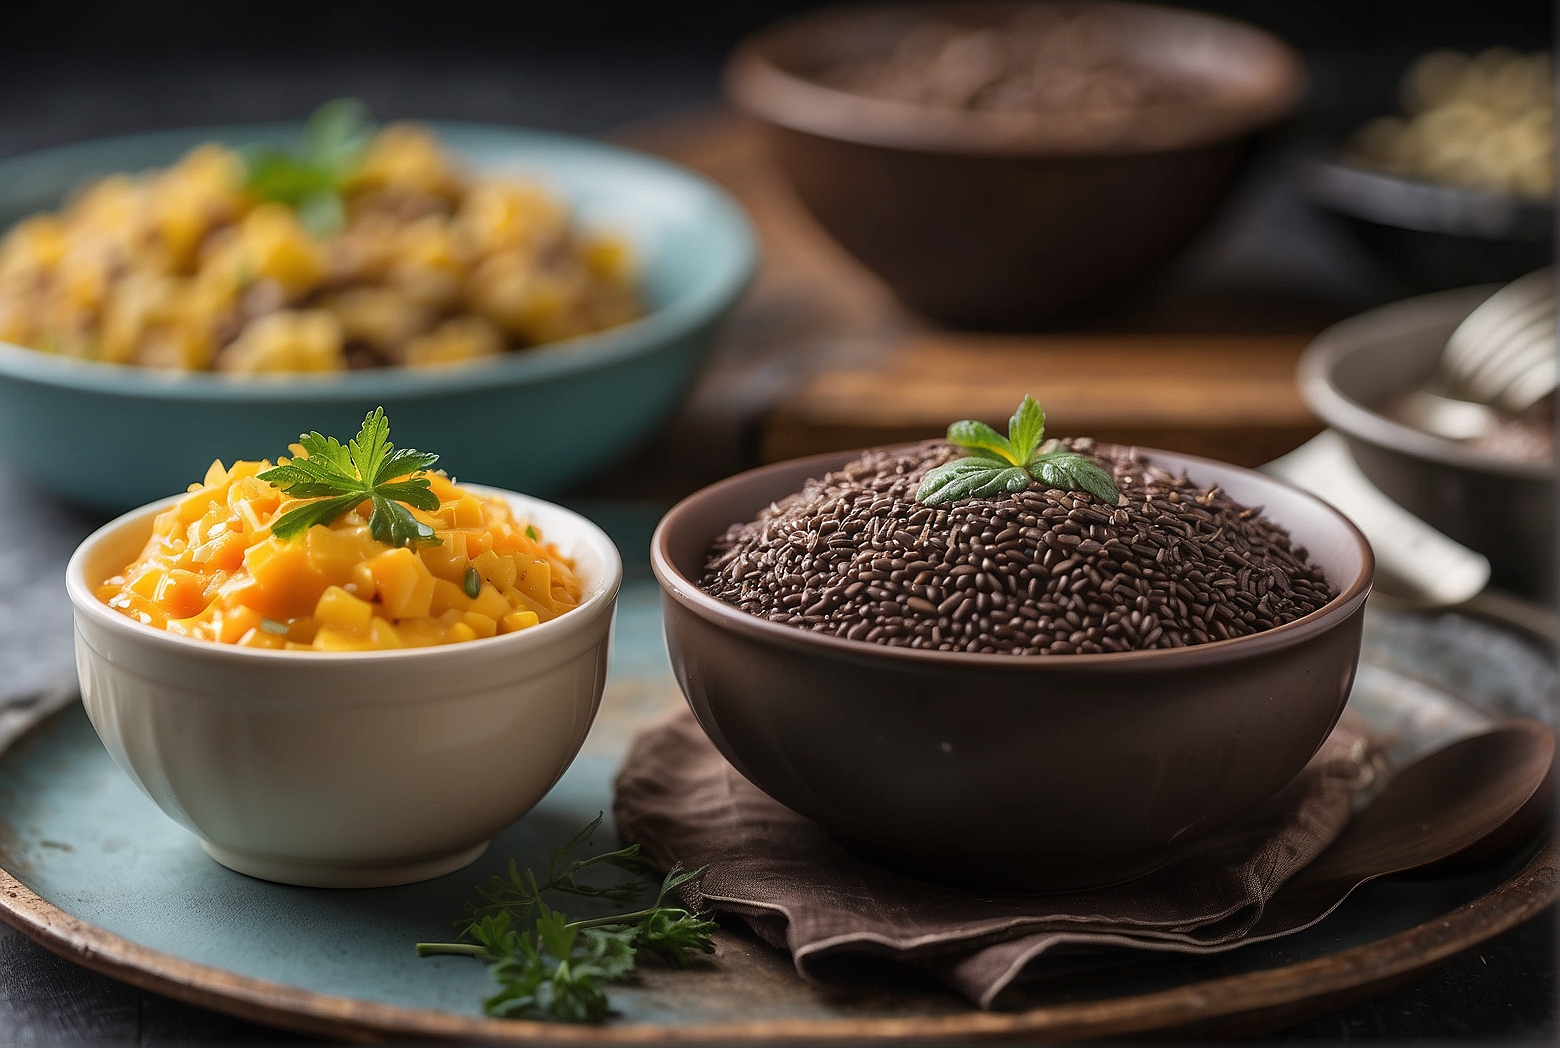 Delicious Side Dishes to Serve with Brigadeiro